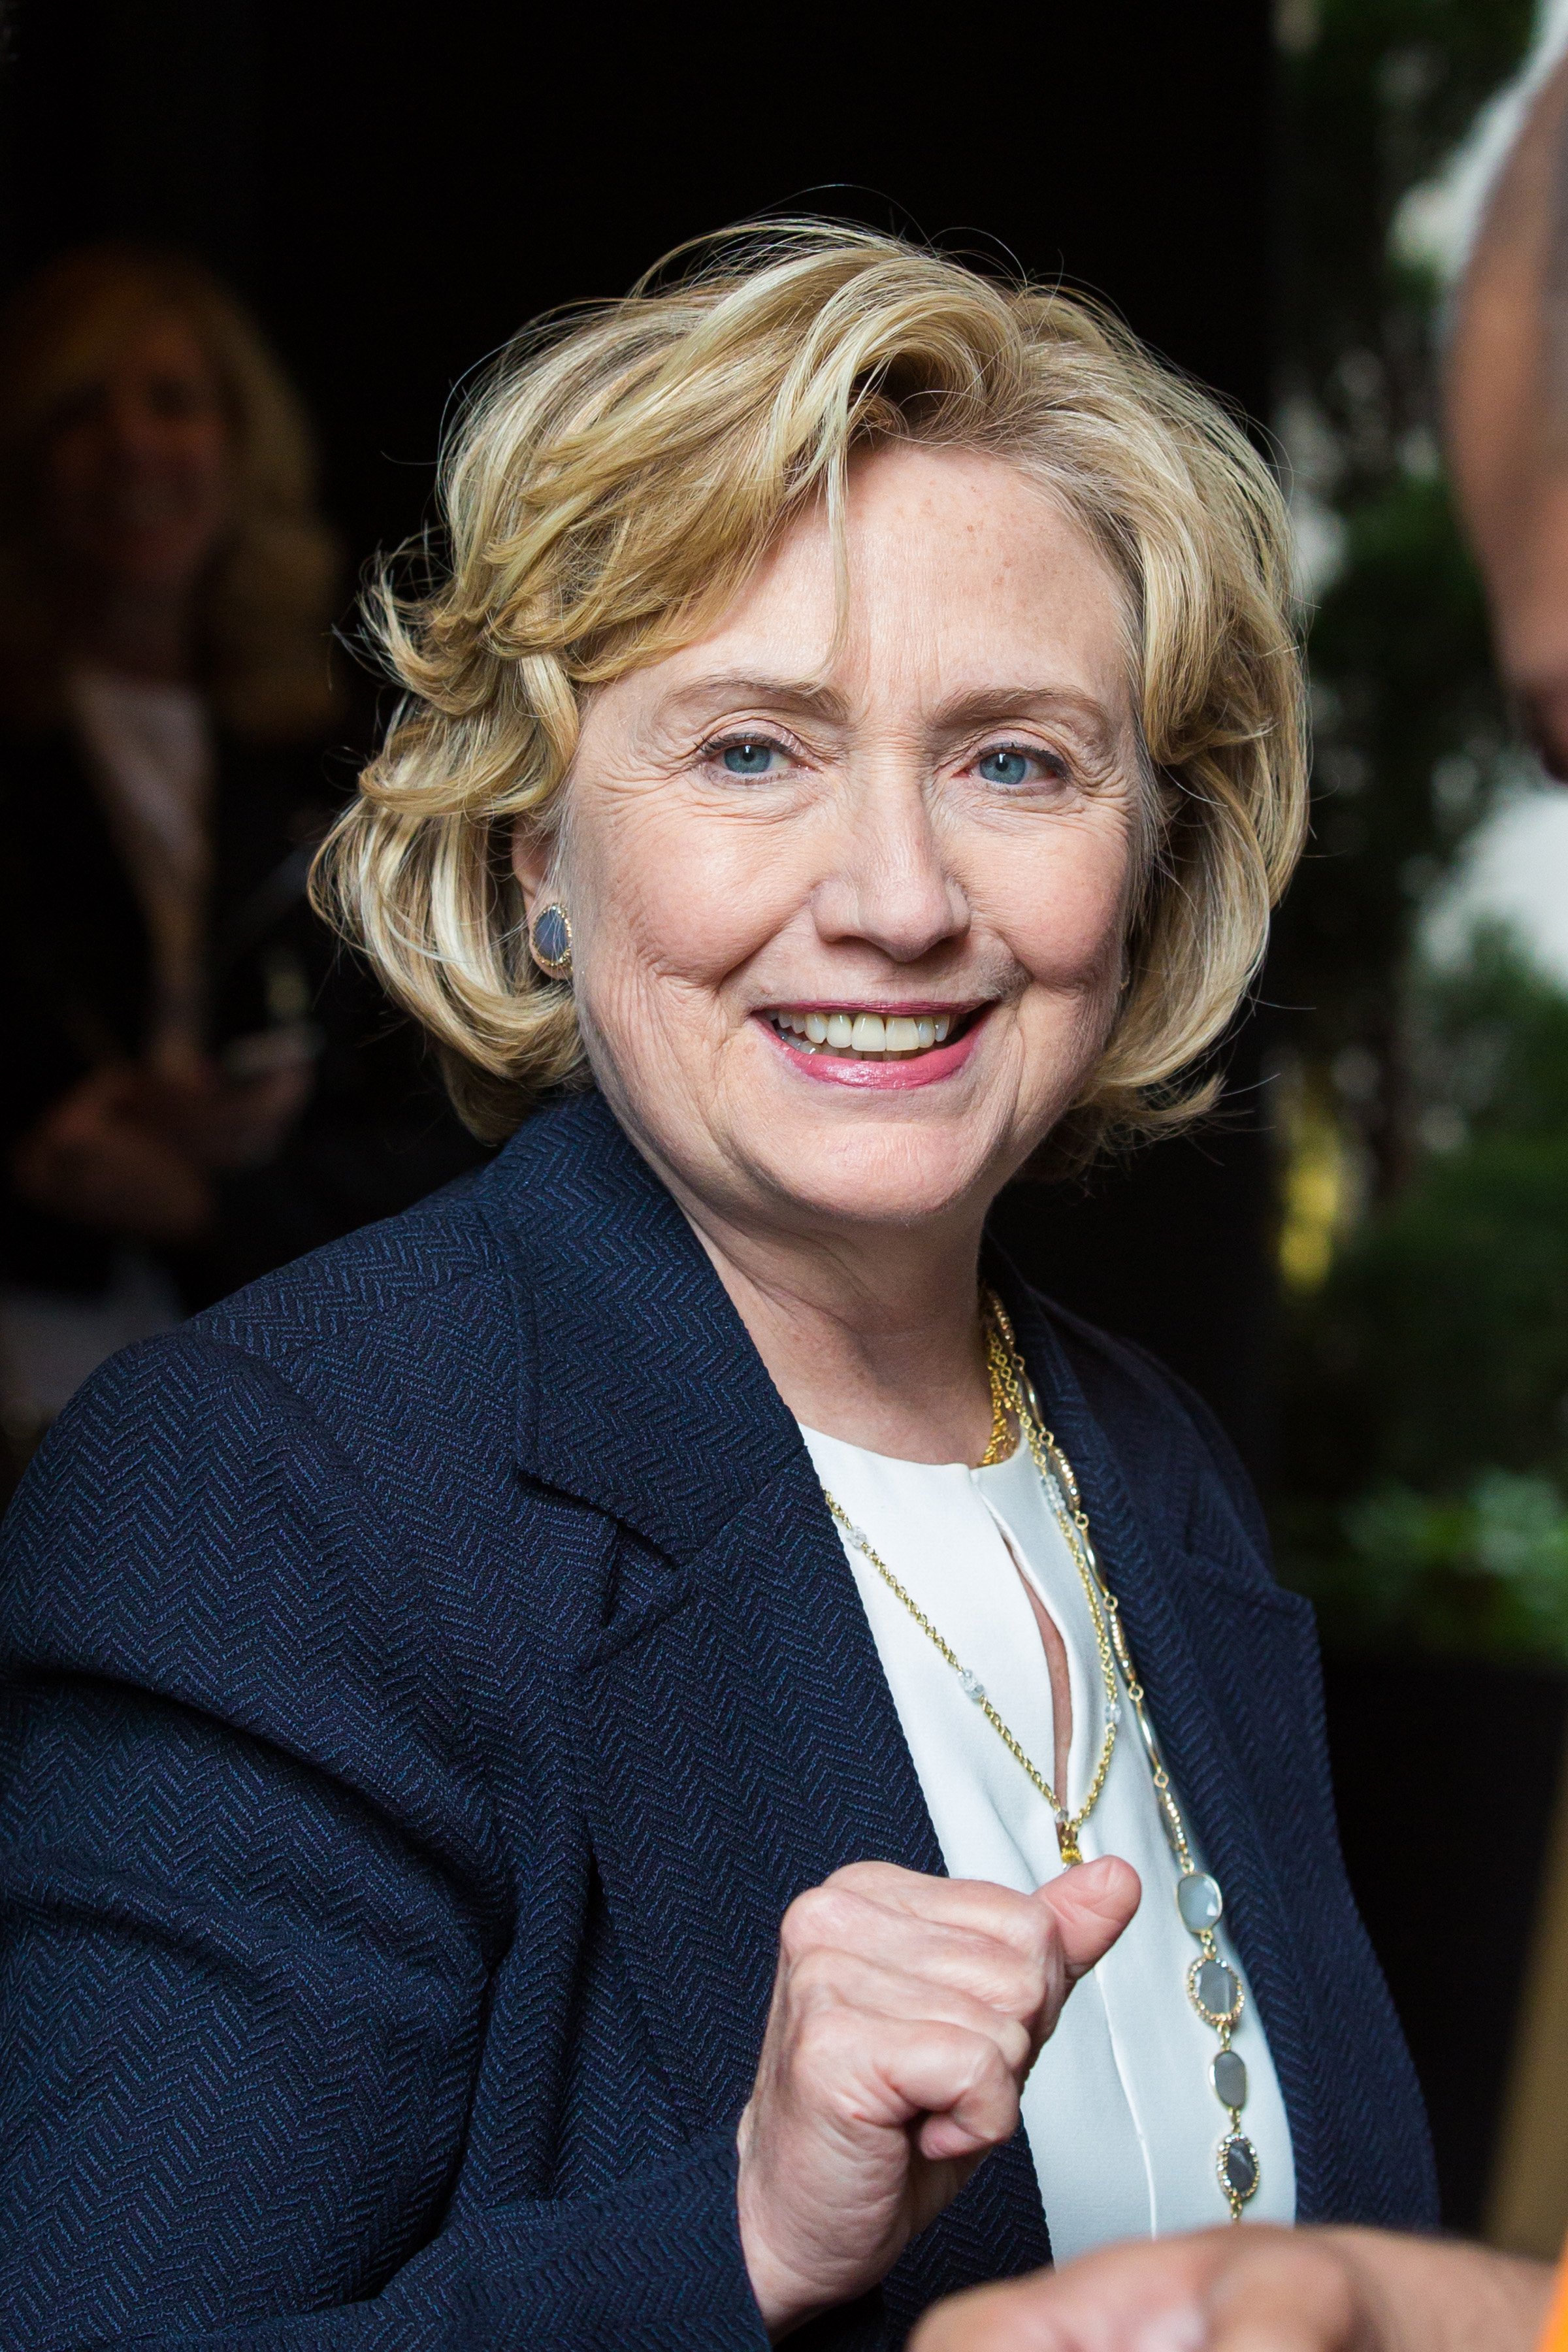 Hillary Clinton is seen arriving at The Carlyle Hotel on July 30, 2014 in New York City. 